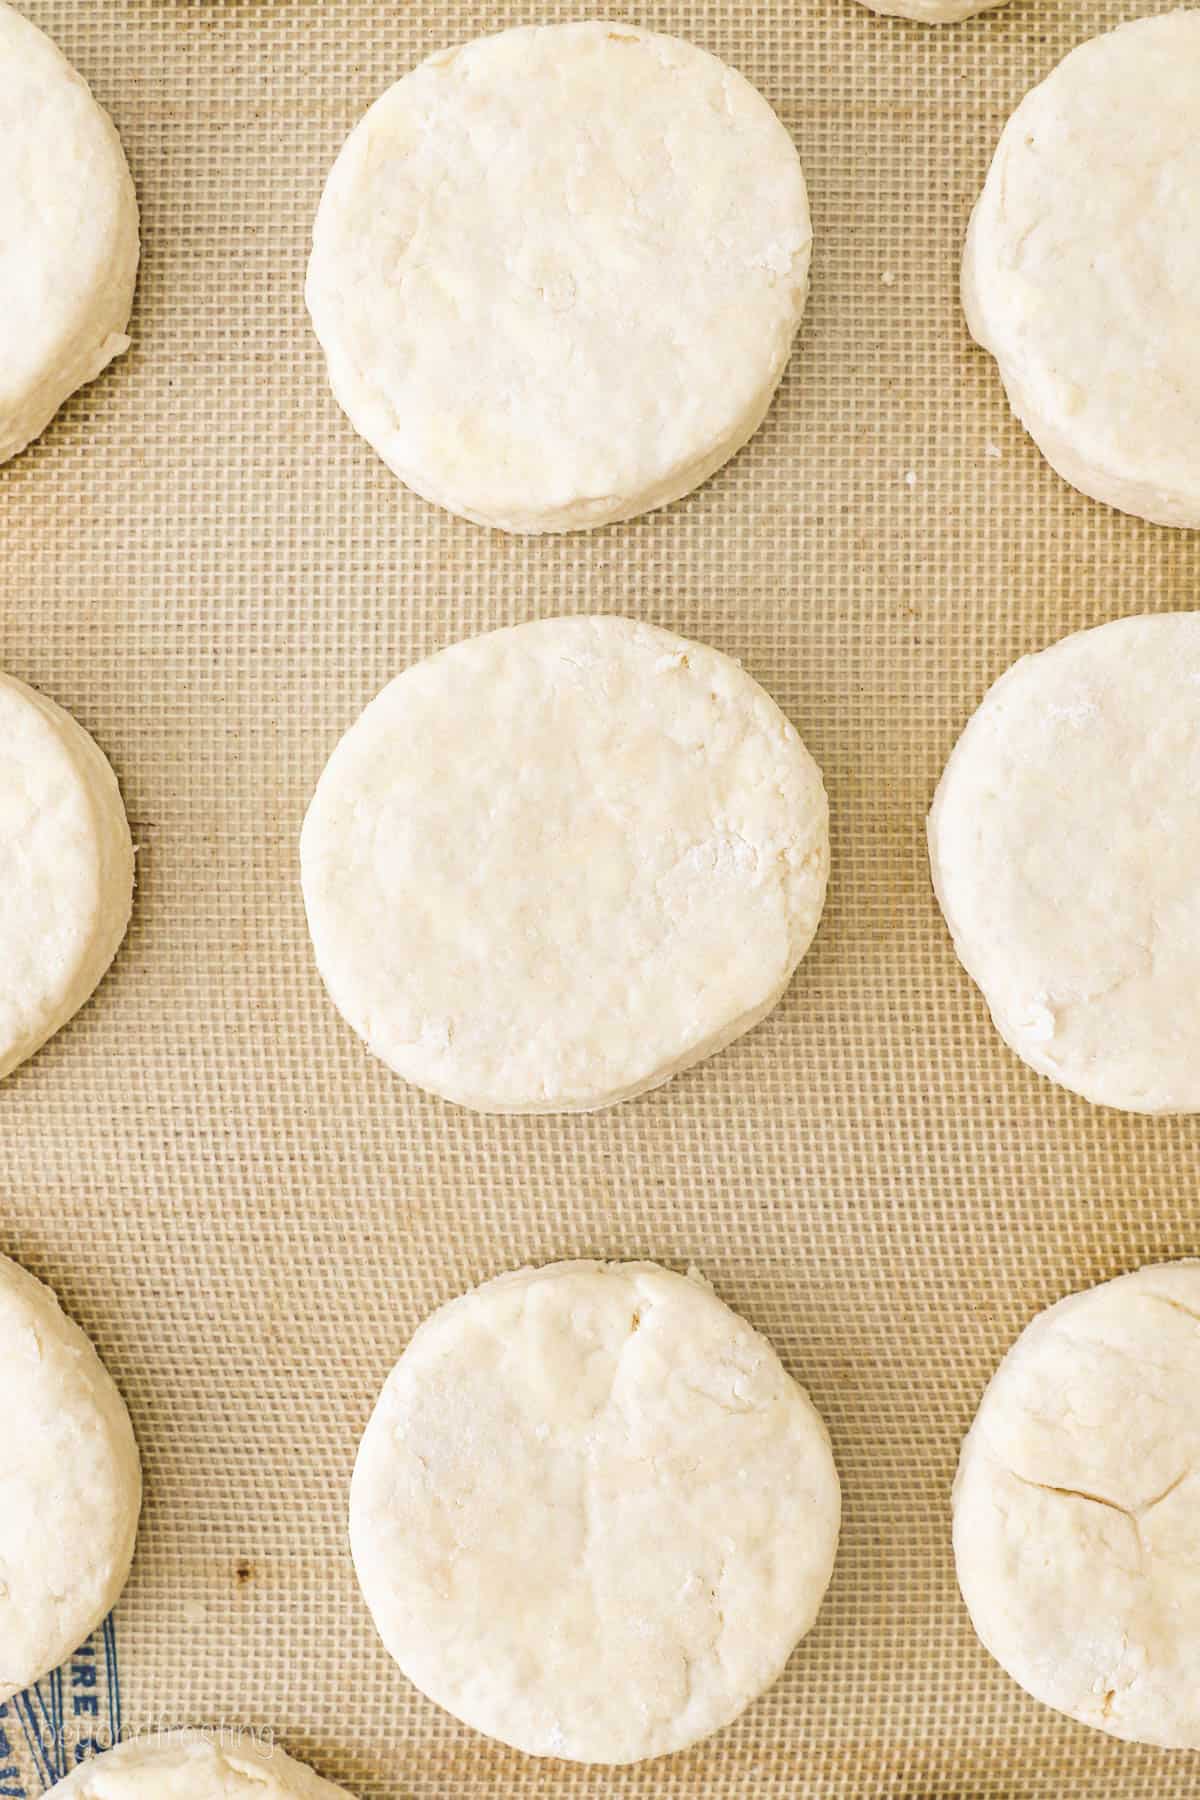 Raw Buttermilk Biscuits are placed on baking tray.